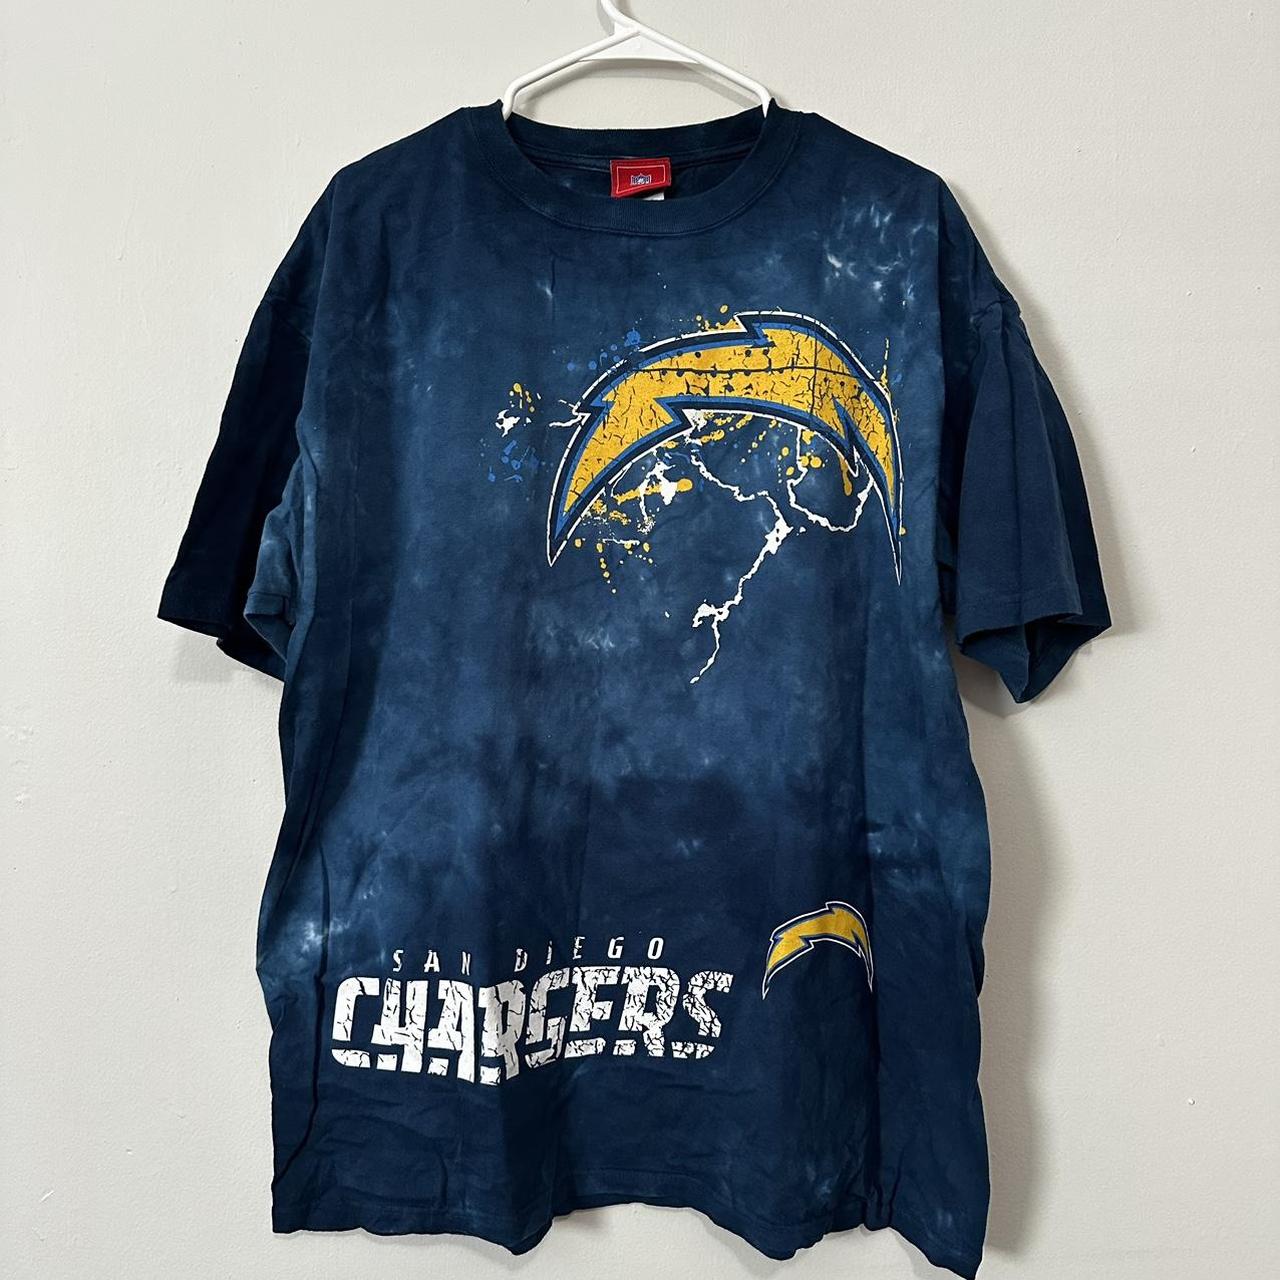 Early 2000s San Diego chargers shirt with - Depop